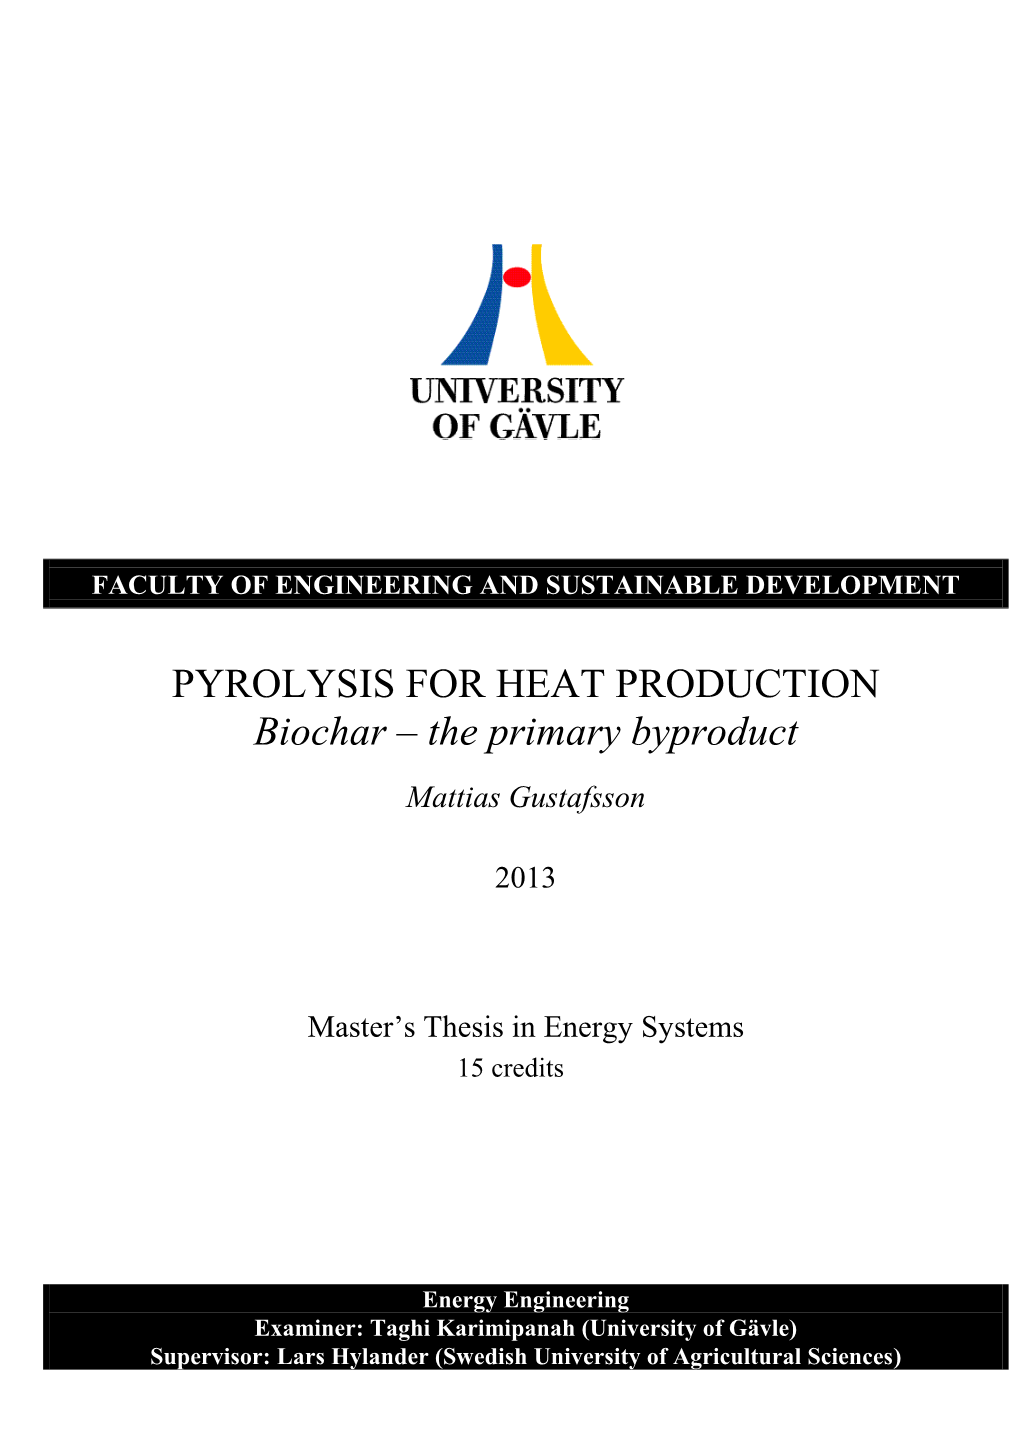 PYROLYSIS for HEAT PRODUCTION Biochar – the Primary Byproduct